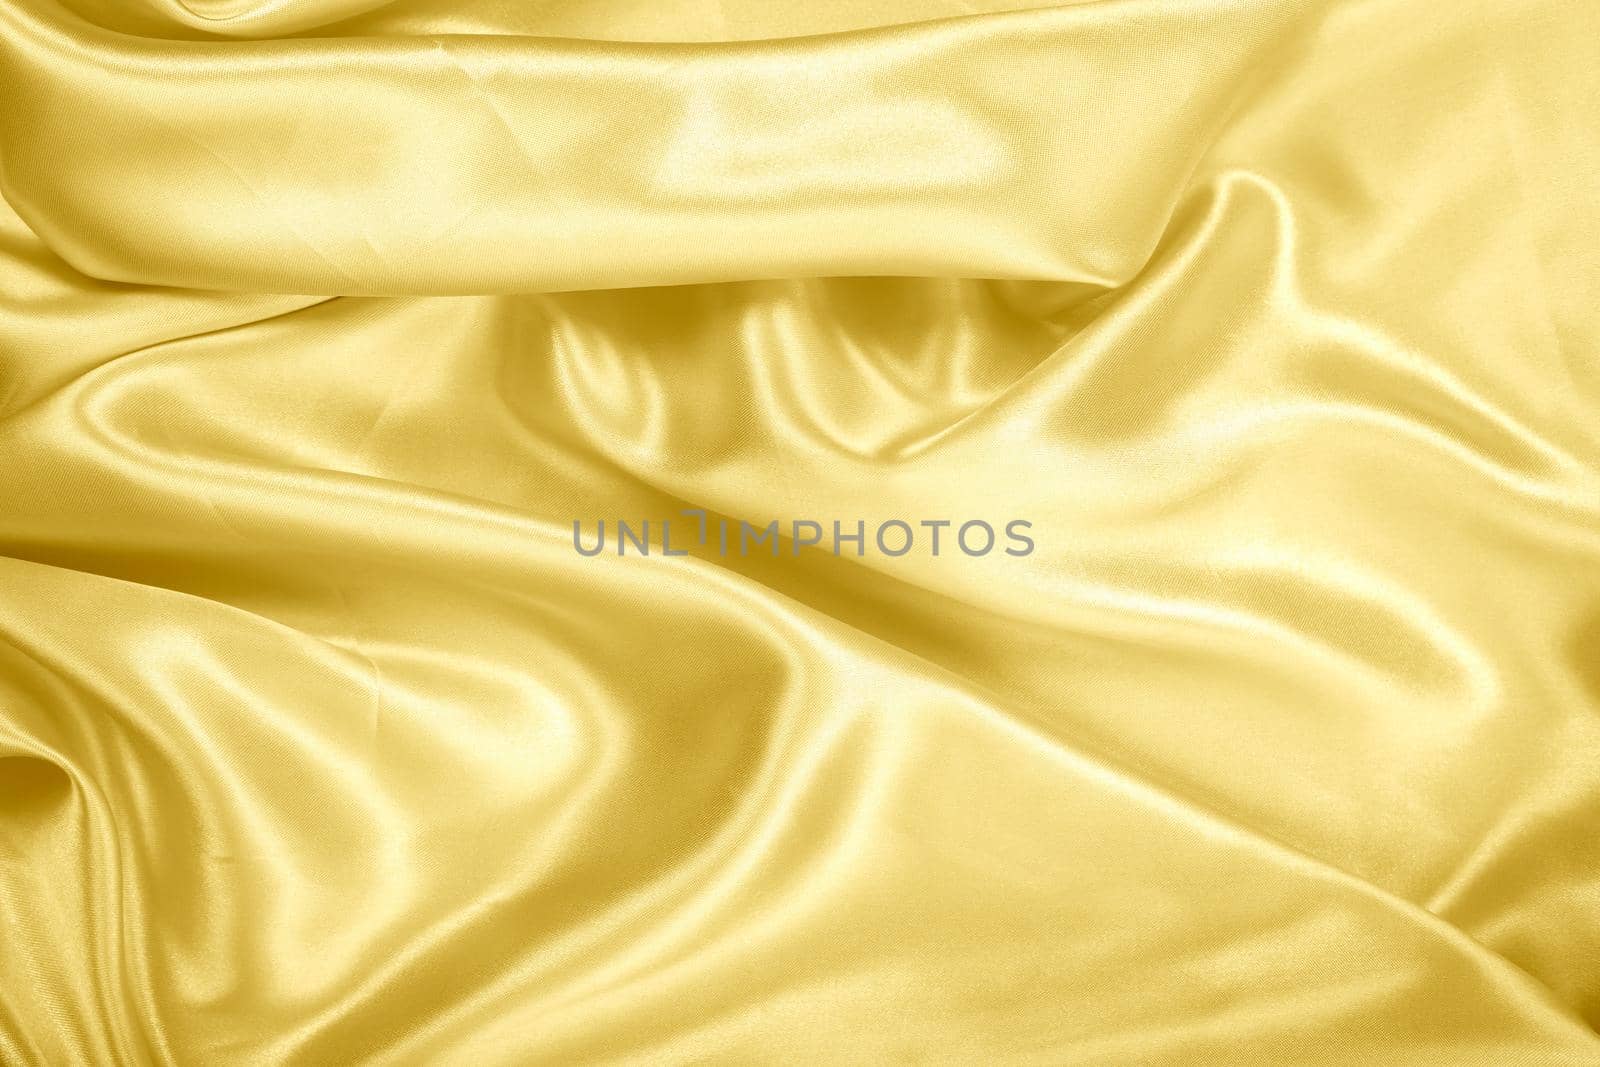 Gold fablic satin on background texture.